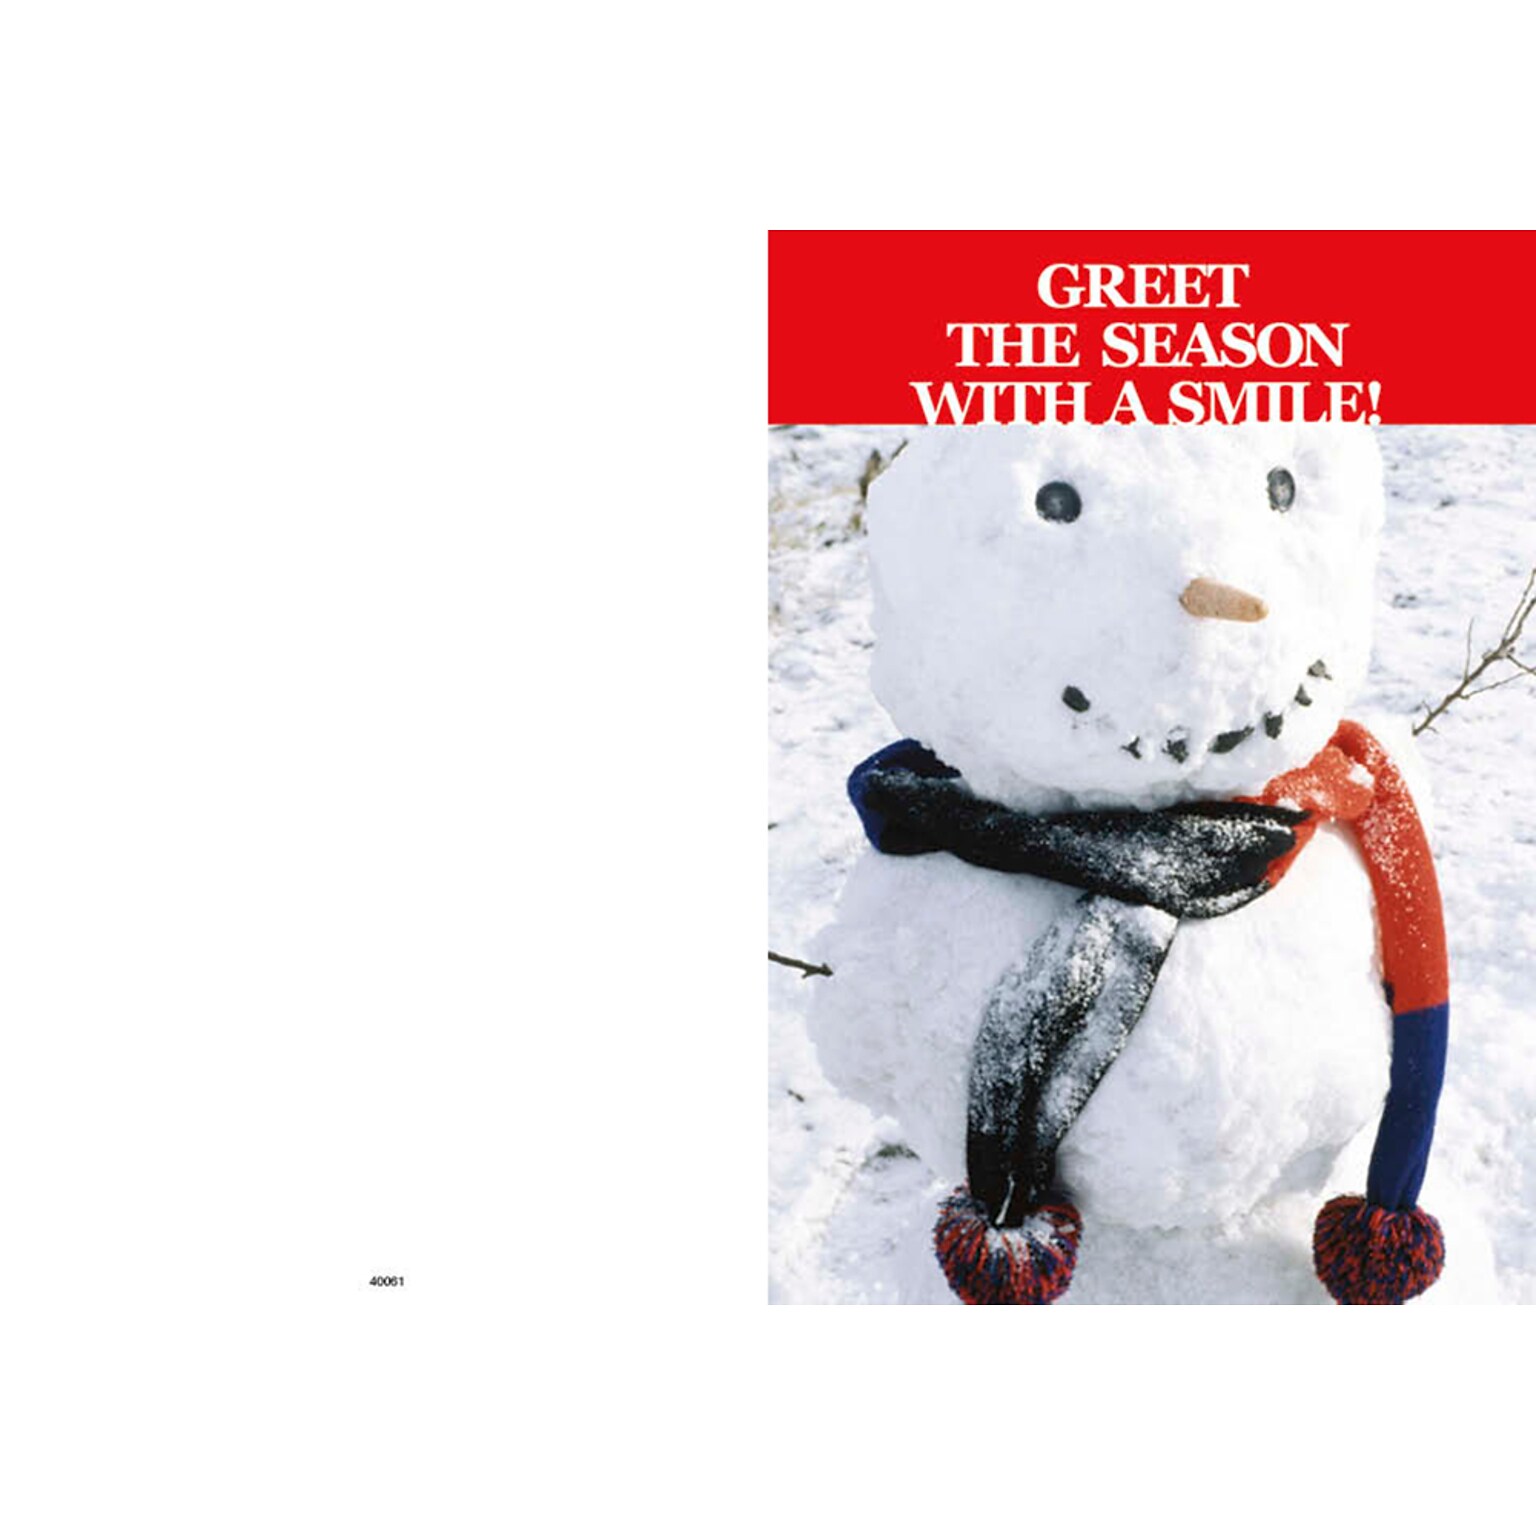 Great the season with a smile - snowman - 7 x 10 scored for folding to 7 x 5, 25 cards w/A7 envelopes per set